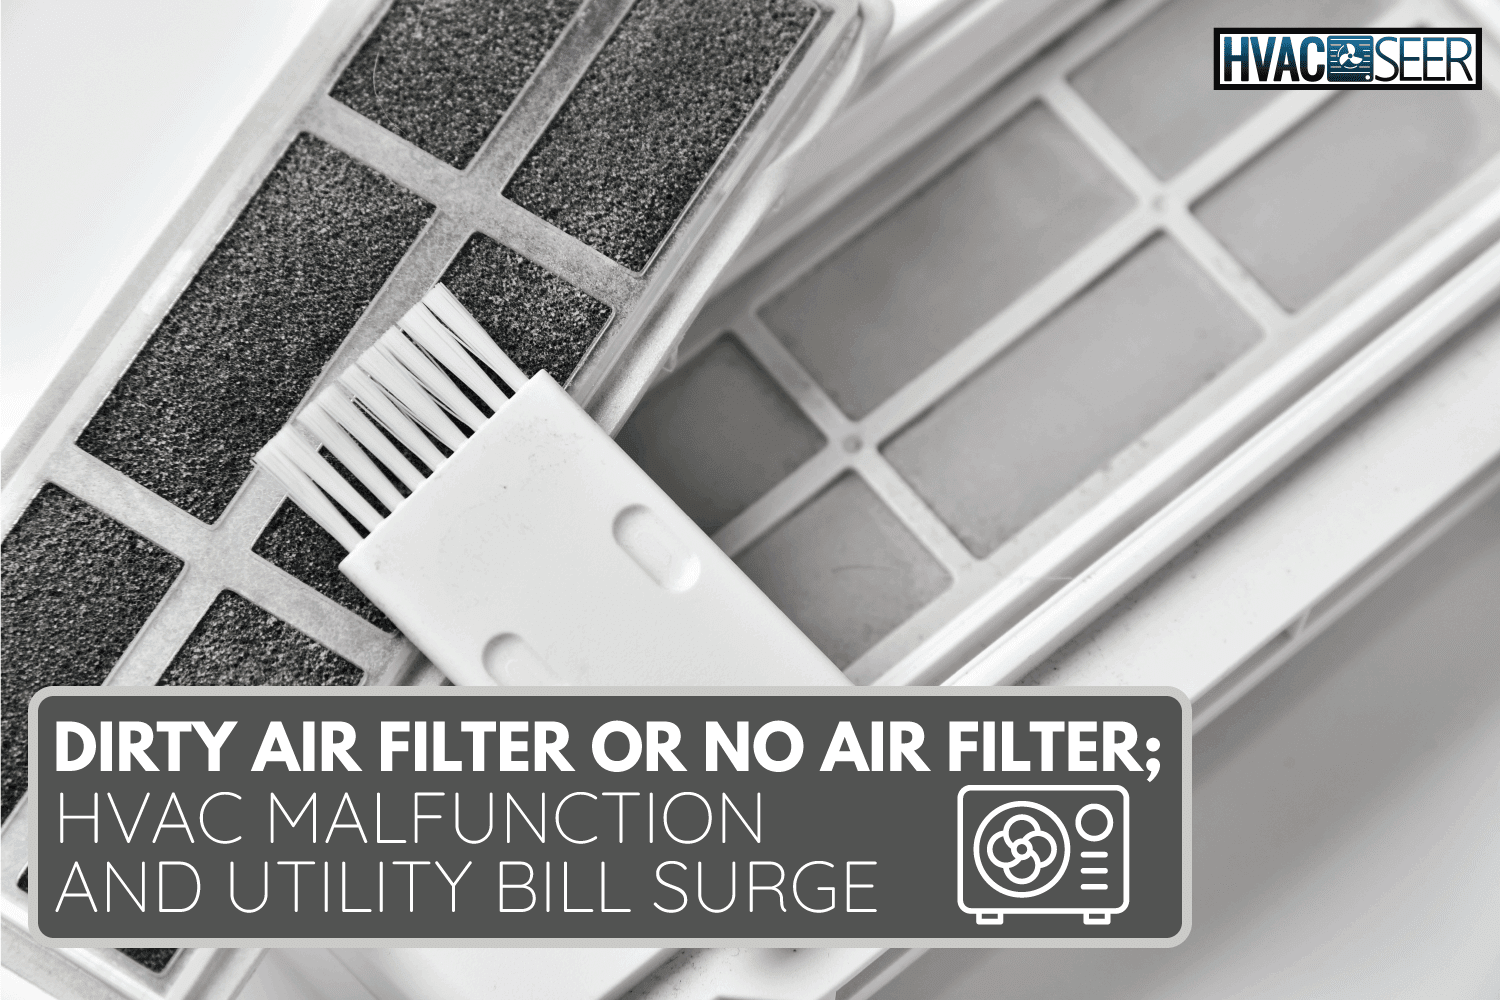 Dirty dust filter and cleaning brush. Is It Better To Have A Dirty Air Filter Or No Air Filter In HVAC